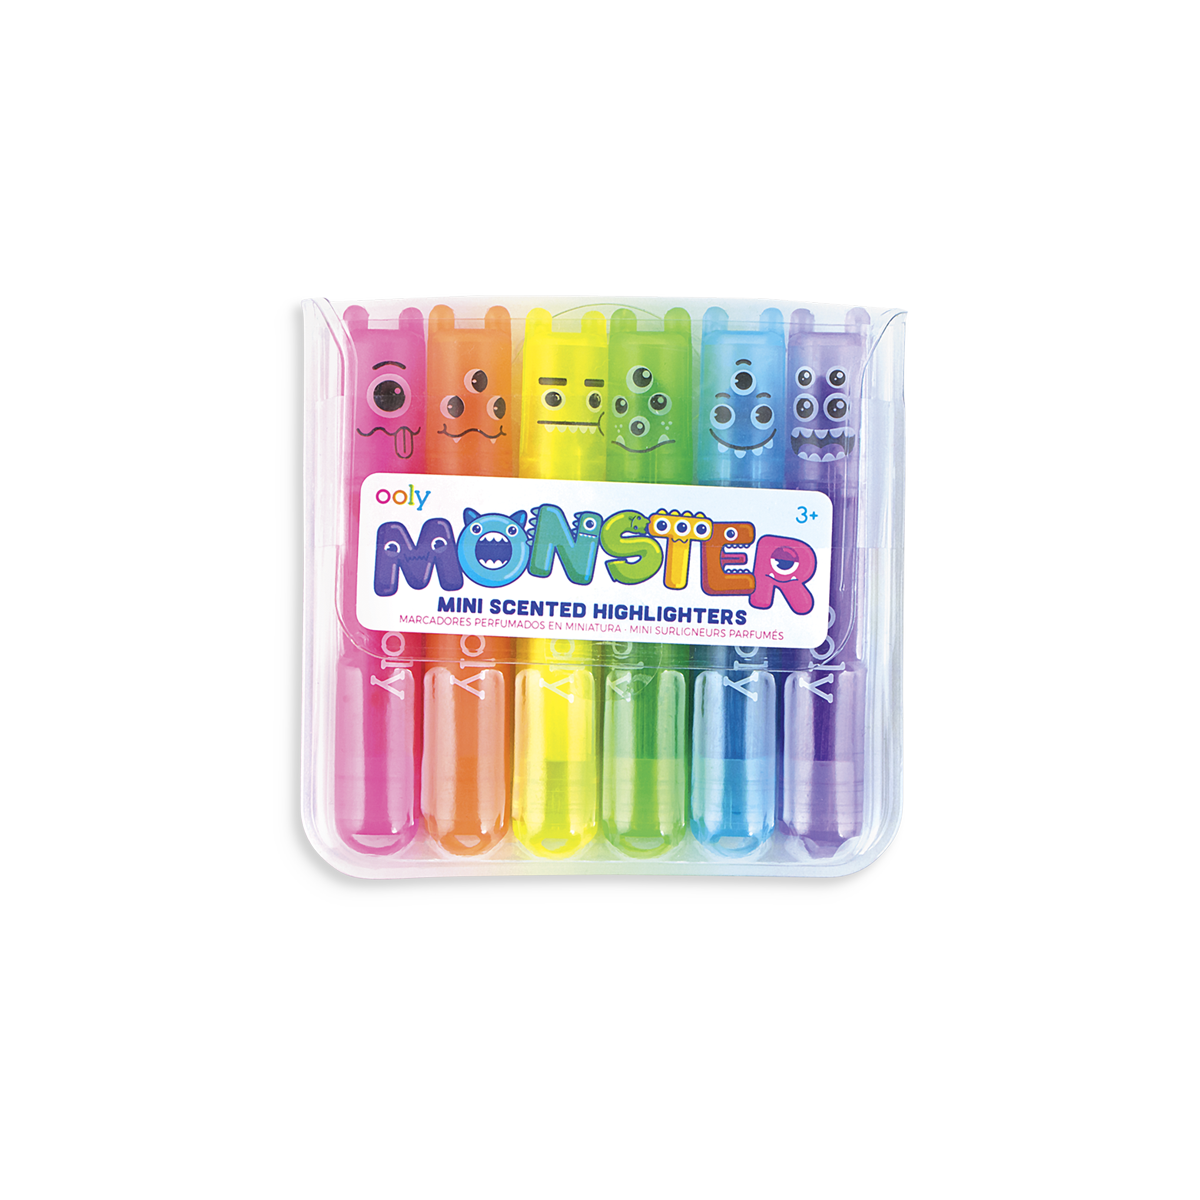 Buy Fine-Tip Sharpie® Neon Markers (Pack of 5) at S&S Worldwide